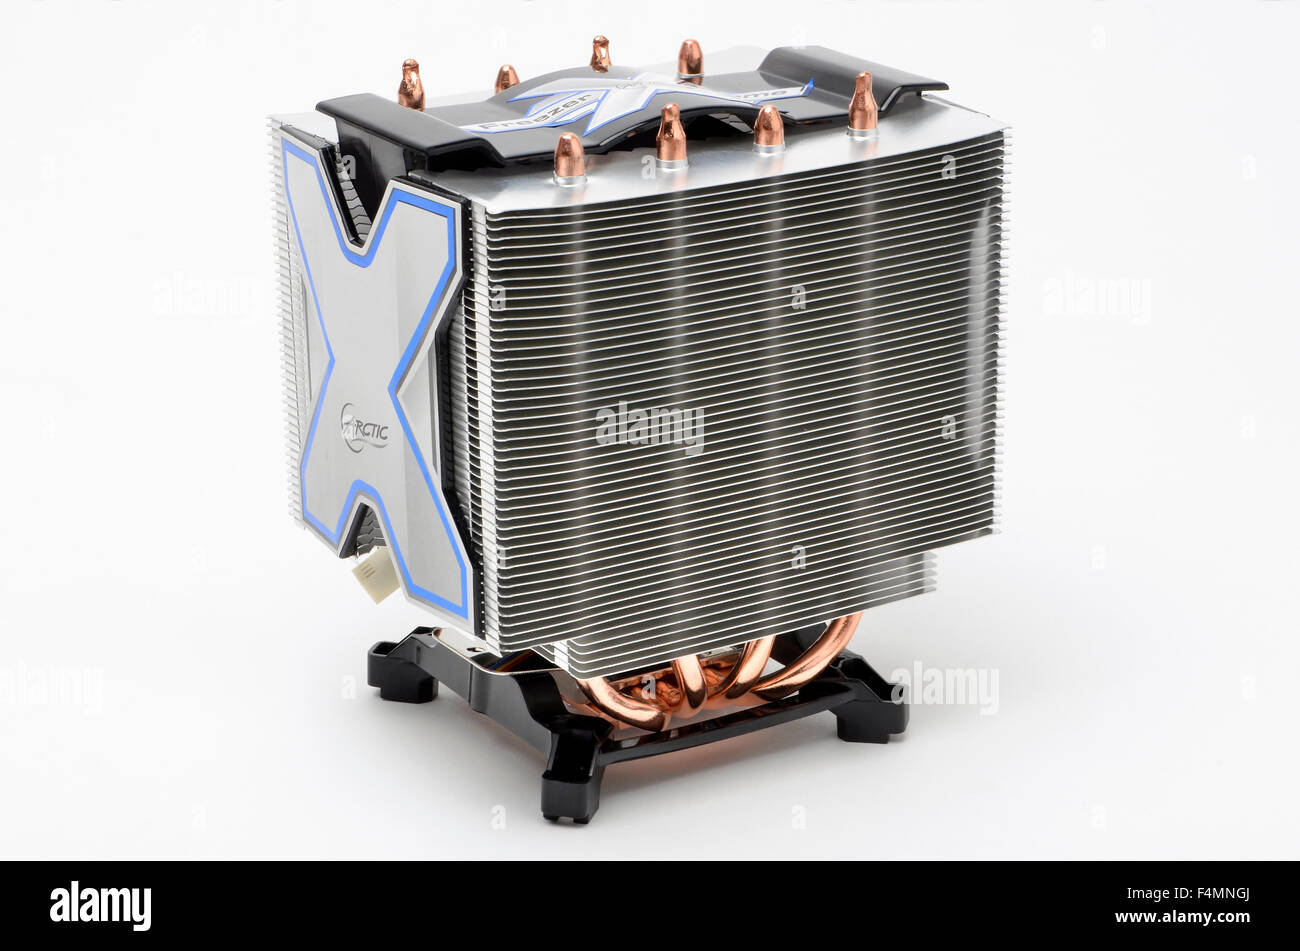 Arctic Cooling Freezer Xtreme CPU cooler and mounting cradle. Stock Photo